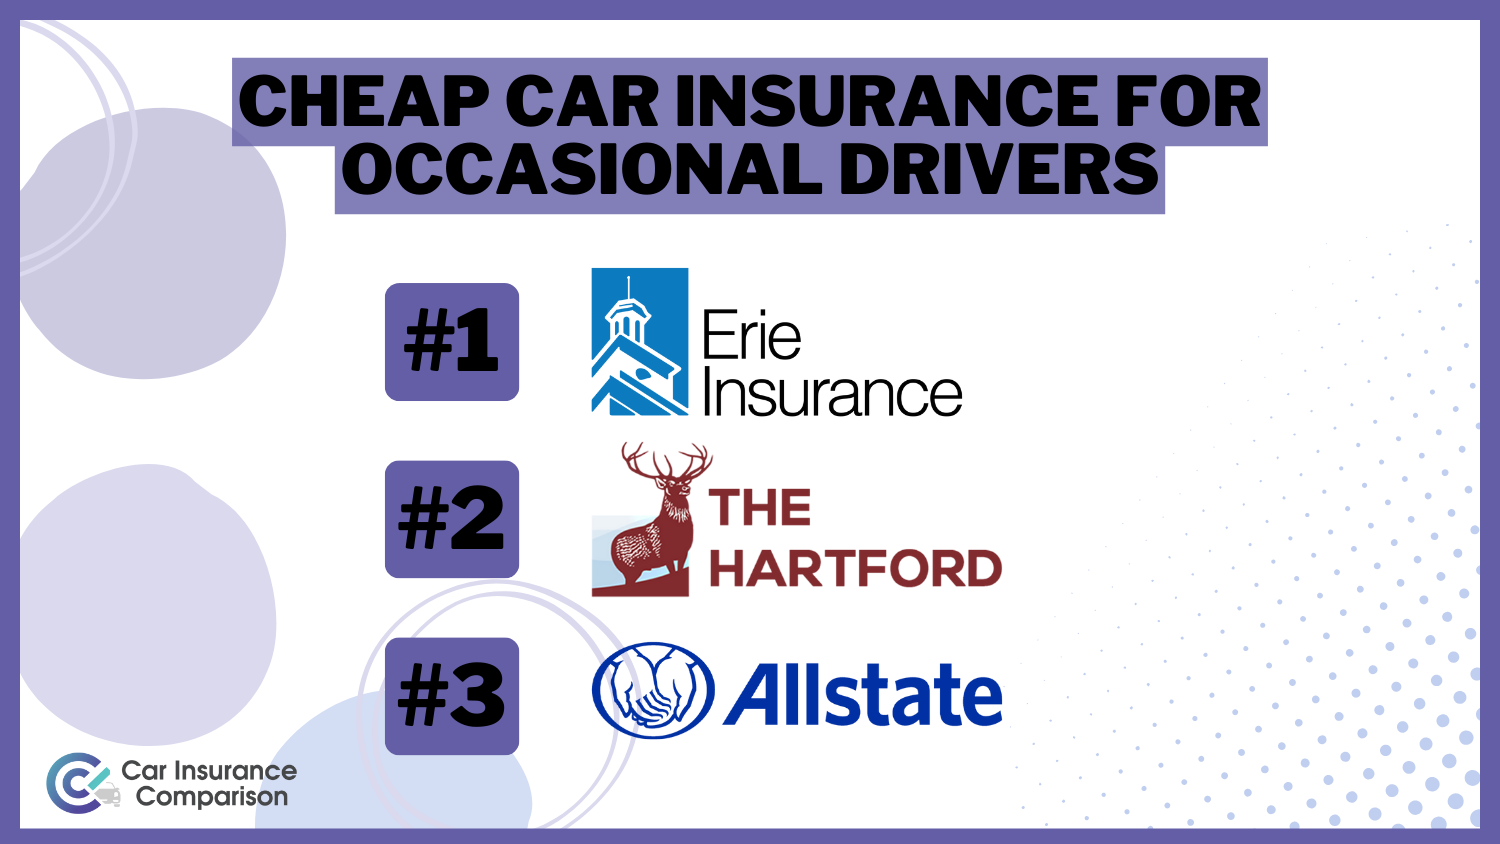 Cheap Car Insurance for Occasional Drivers: Erie, The Hartford, and Allstate